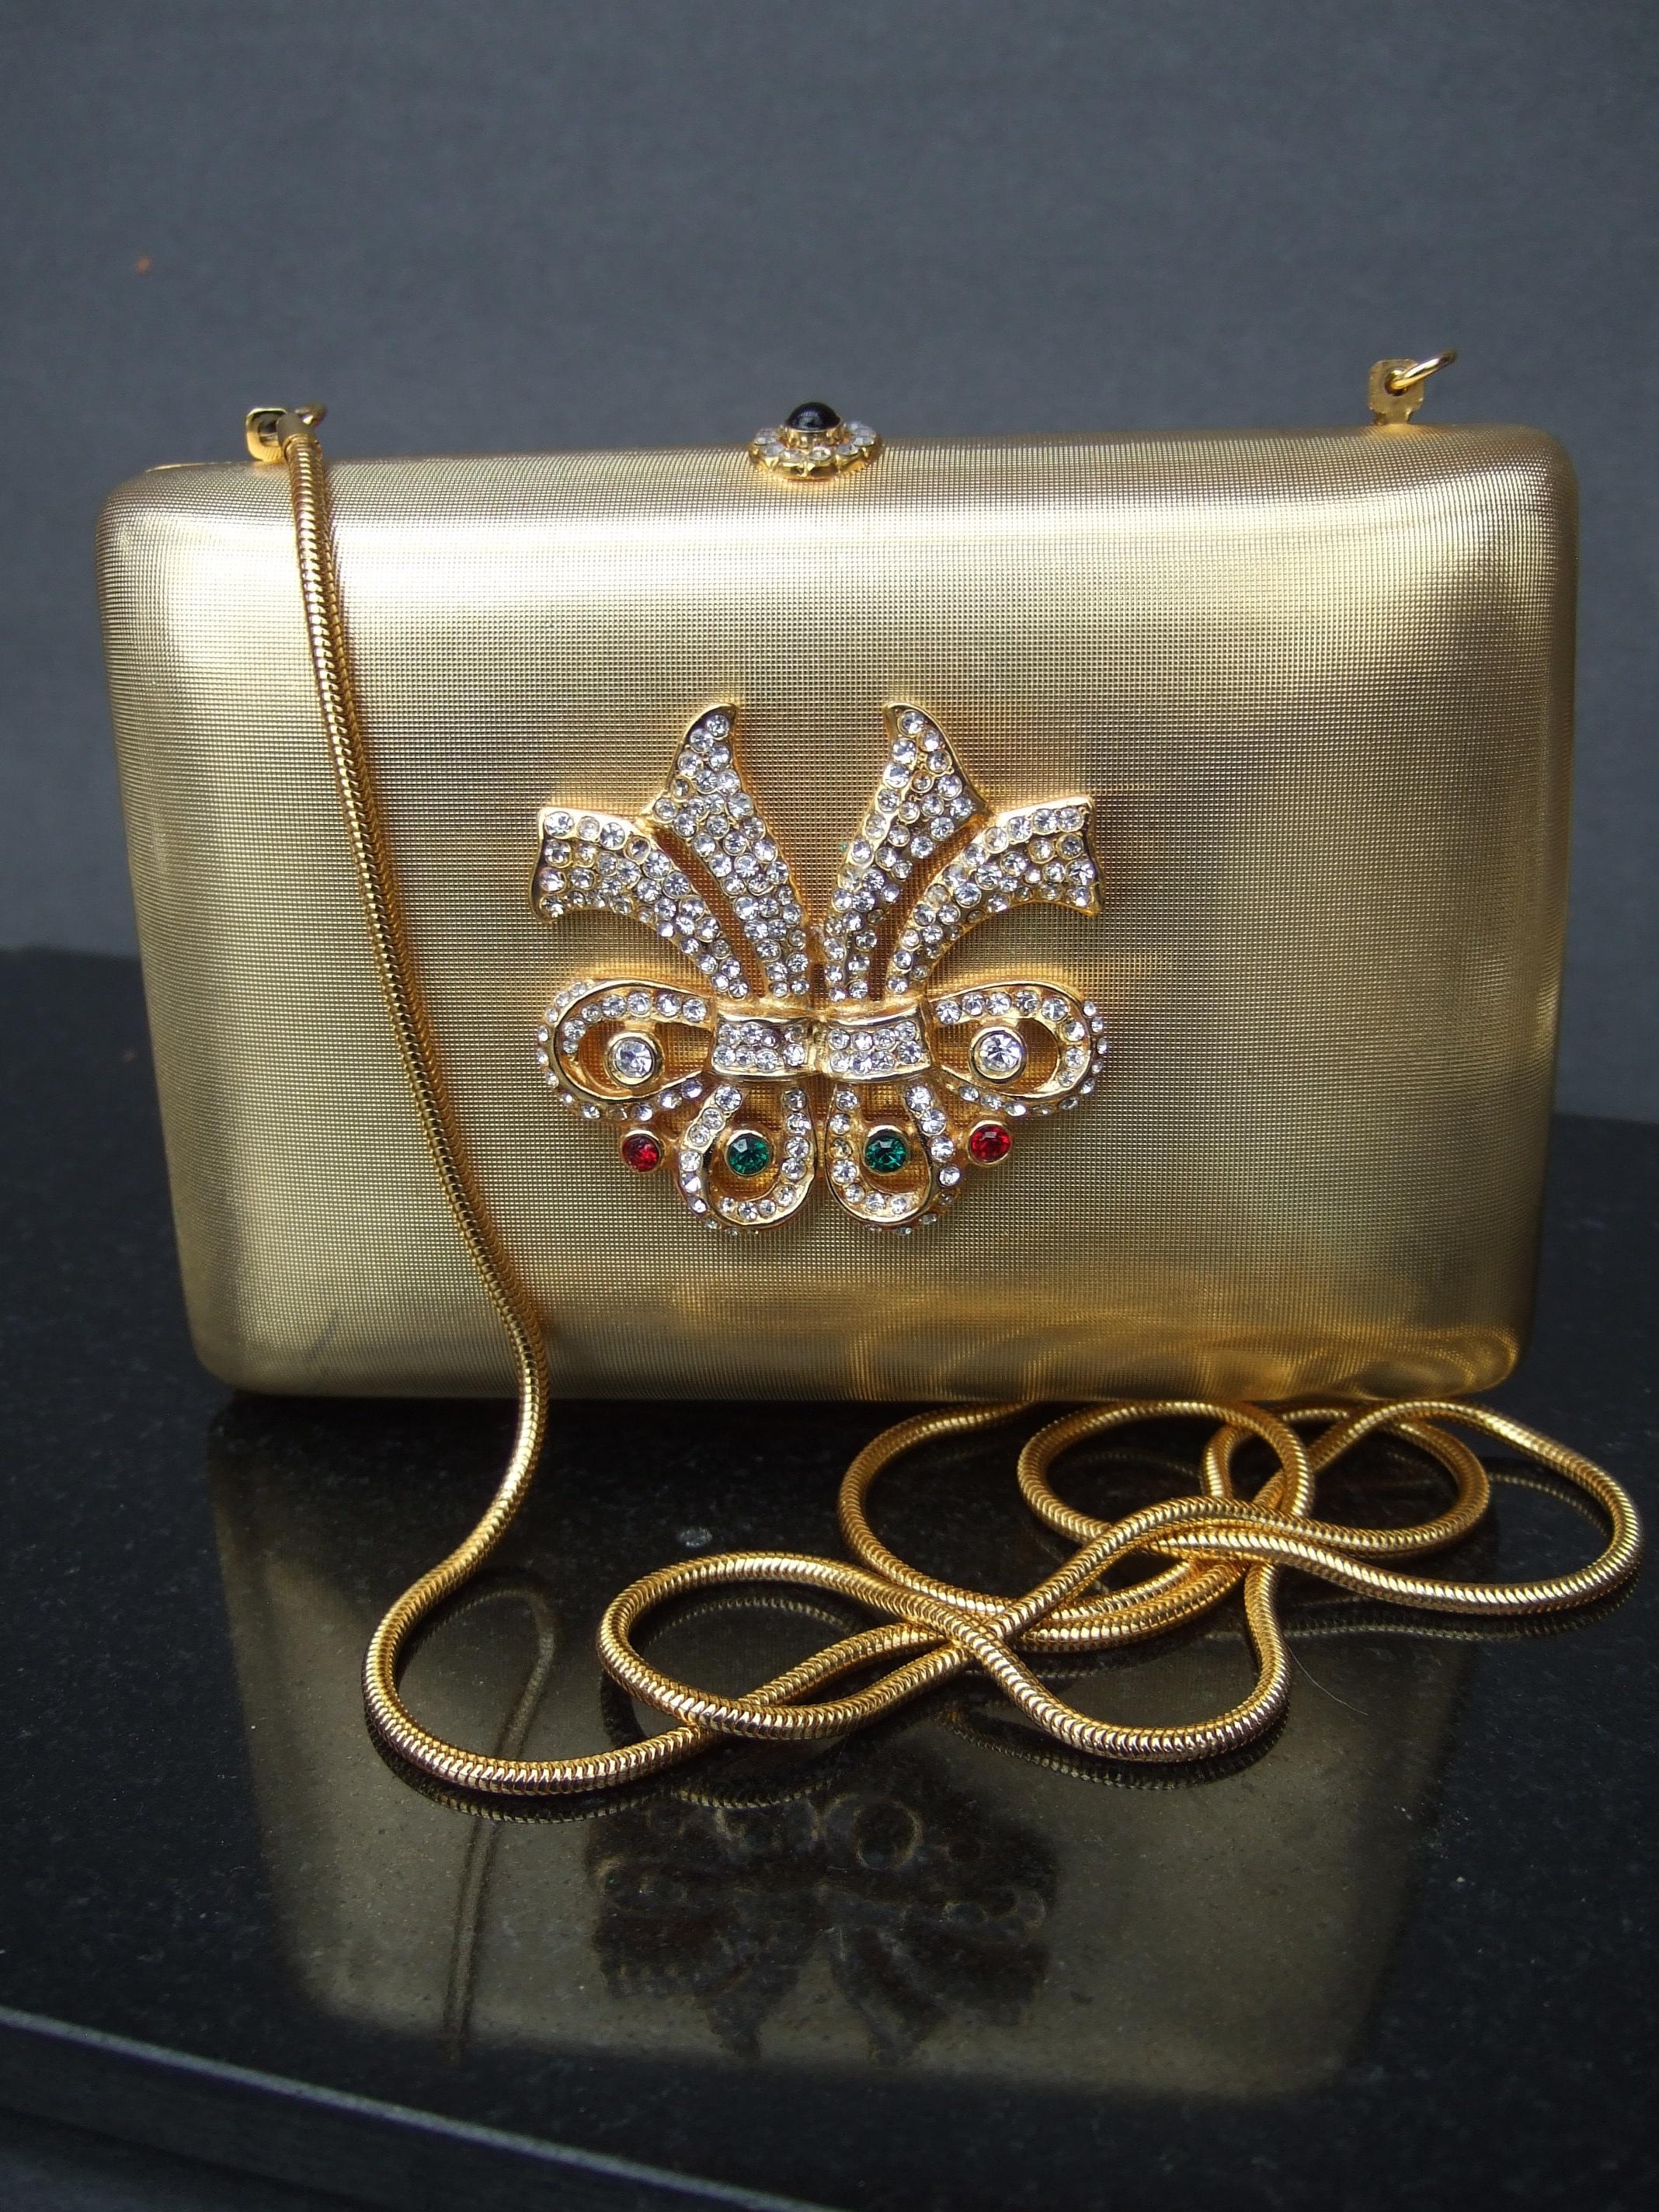 Saks Fifth Avenue Italian gilt metal crystal medallion minaudiere' evening bag c 1980s
The elegant gold metal evening bag has a satin matte finish. The front exterior panel
is adorned with a sinuous medallion encrusted with diamante & jewel crystals